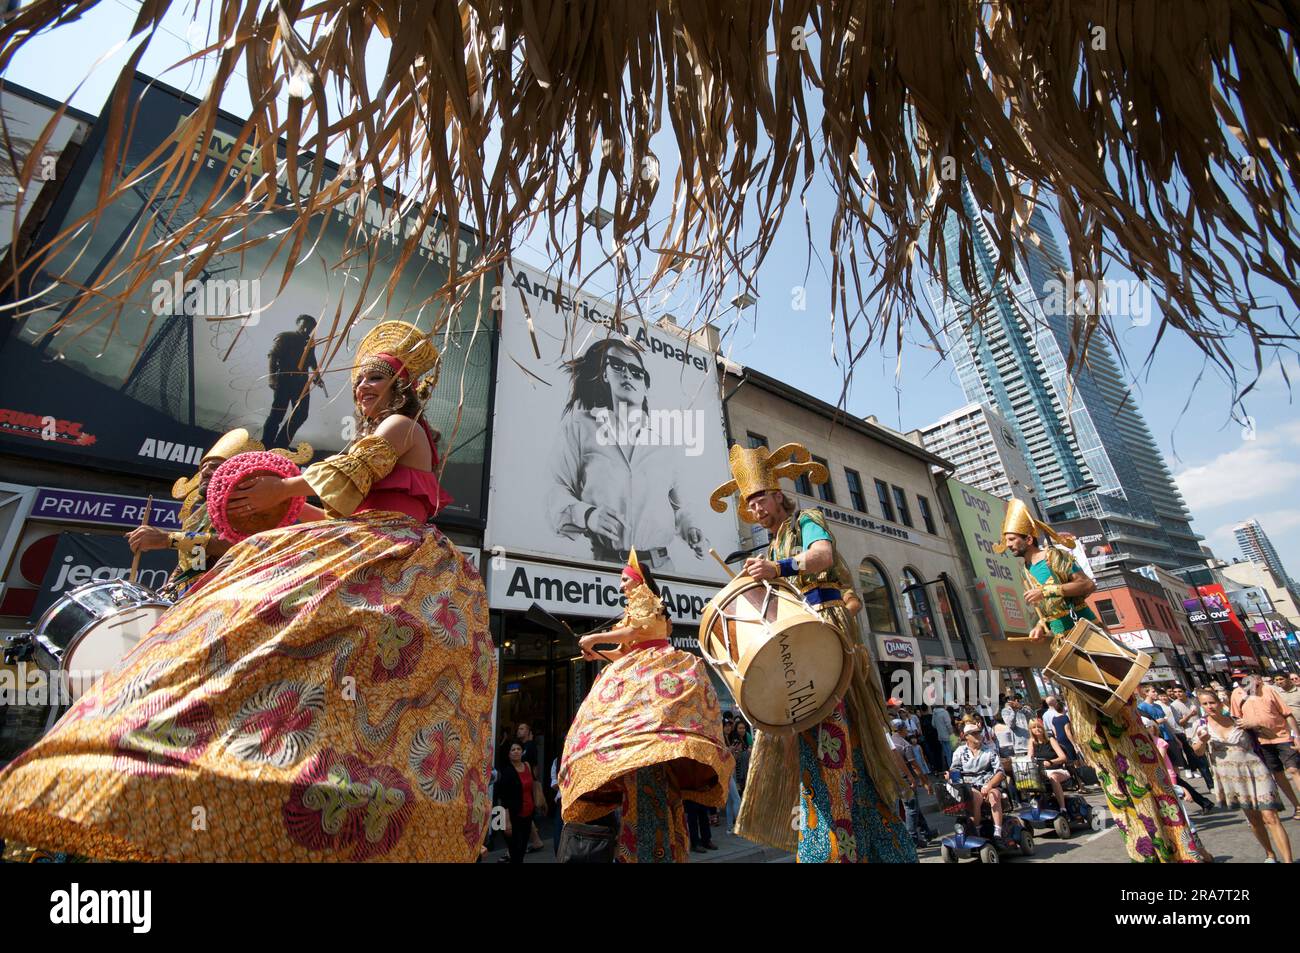 Toronto, Ontario / Canada - Aug 28, 2015: Performers on stilts playing musical instruments in a street festival Stock Photo